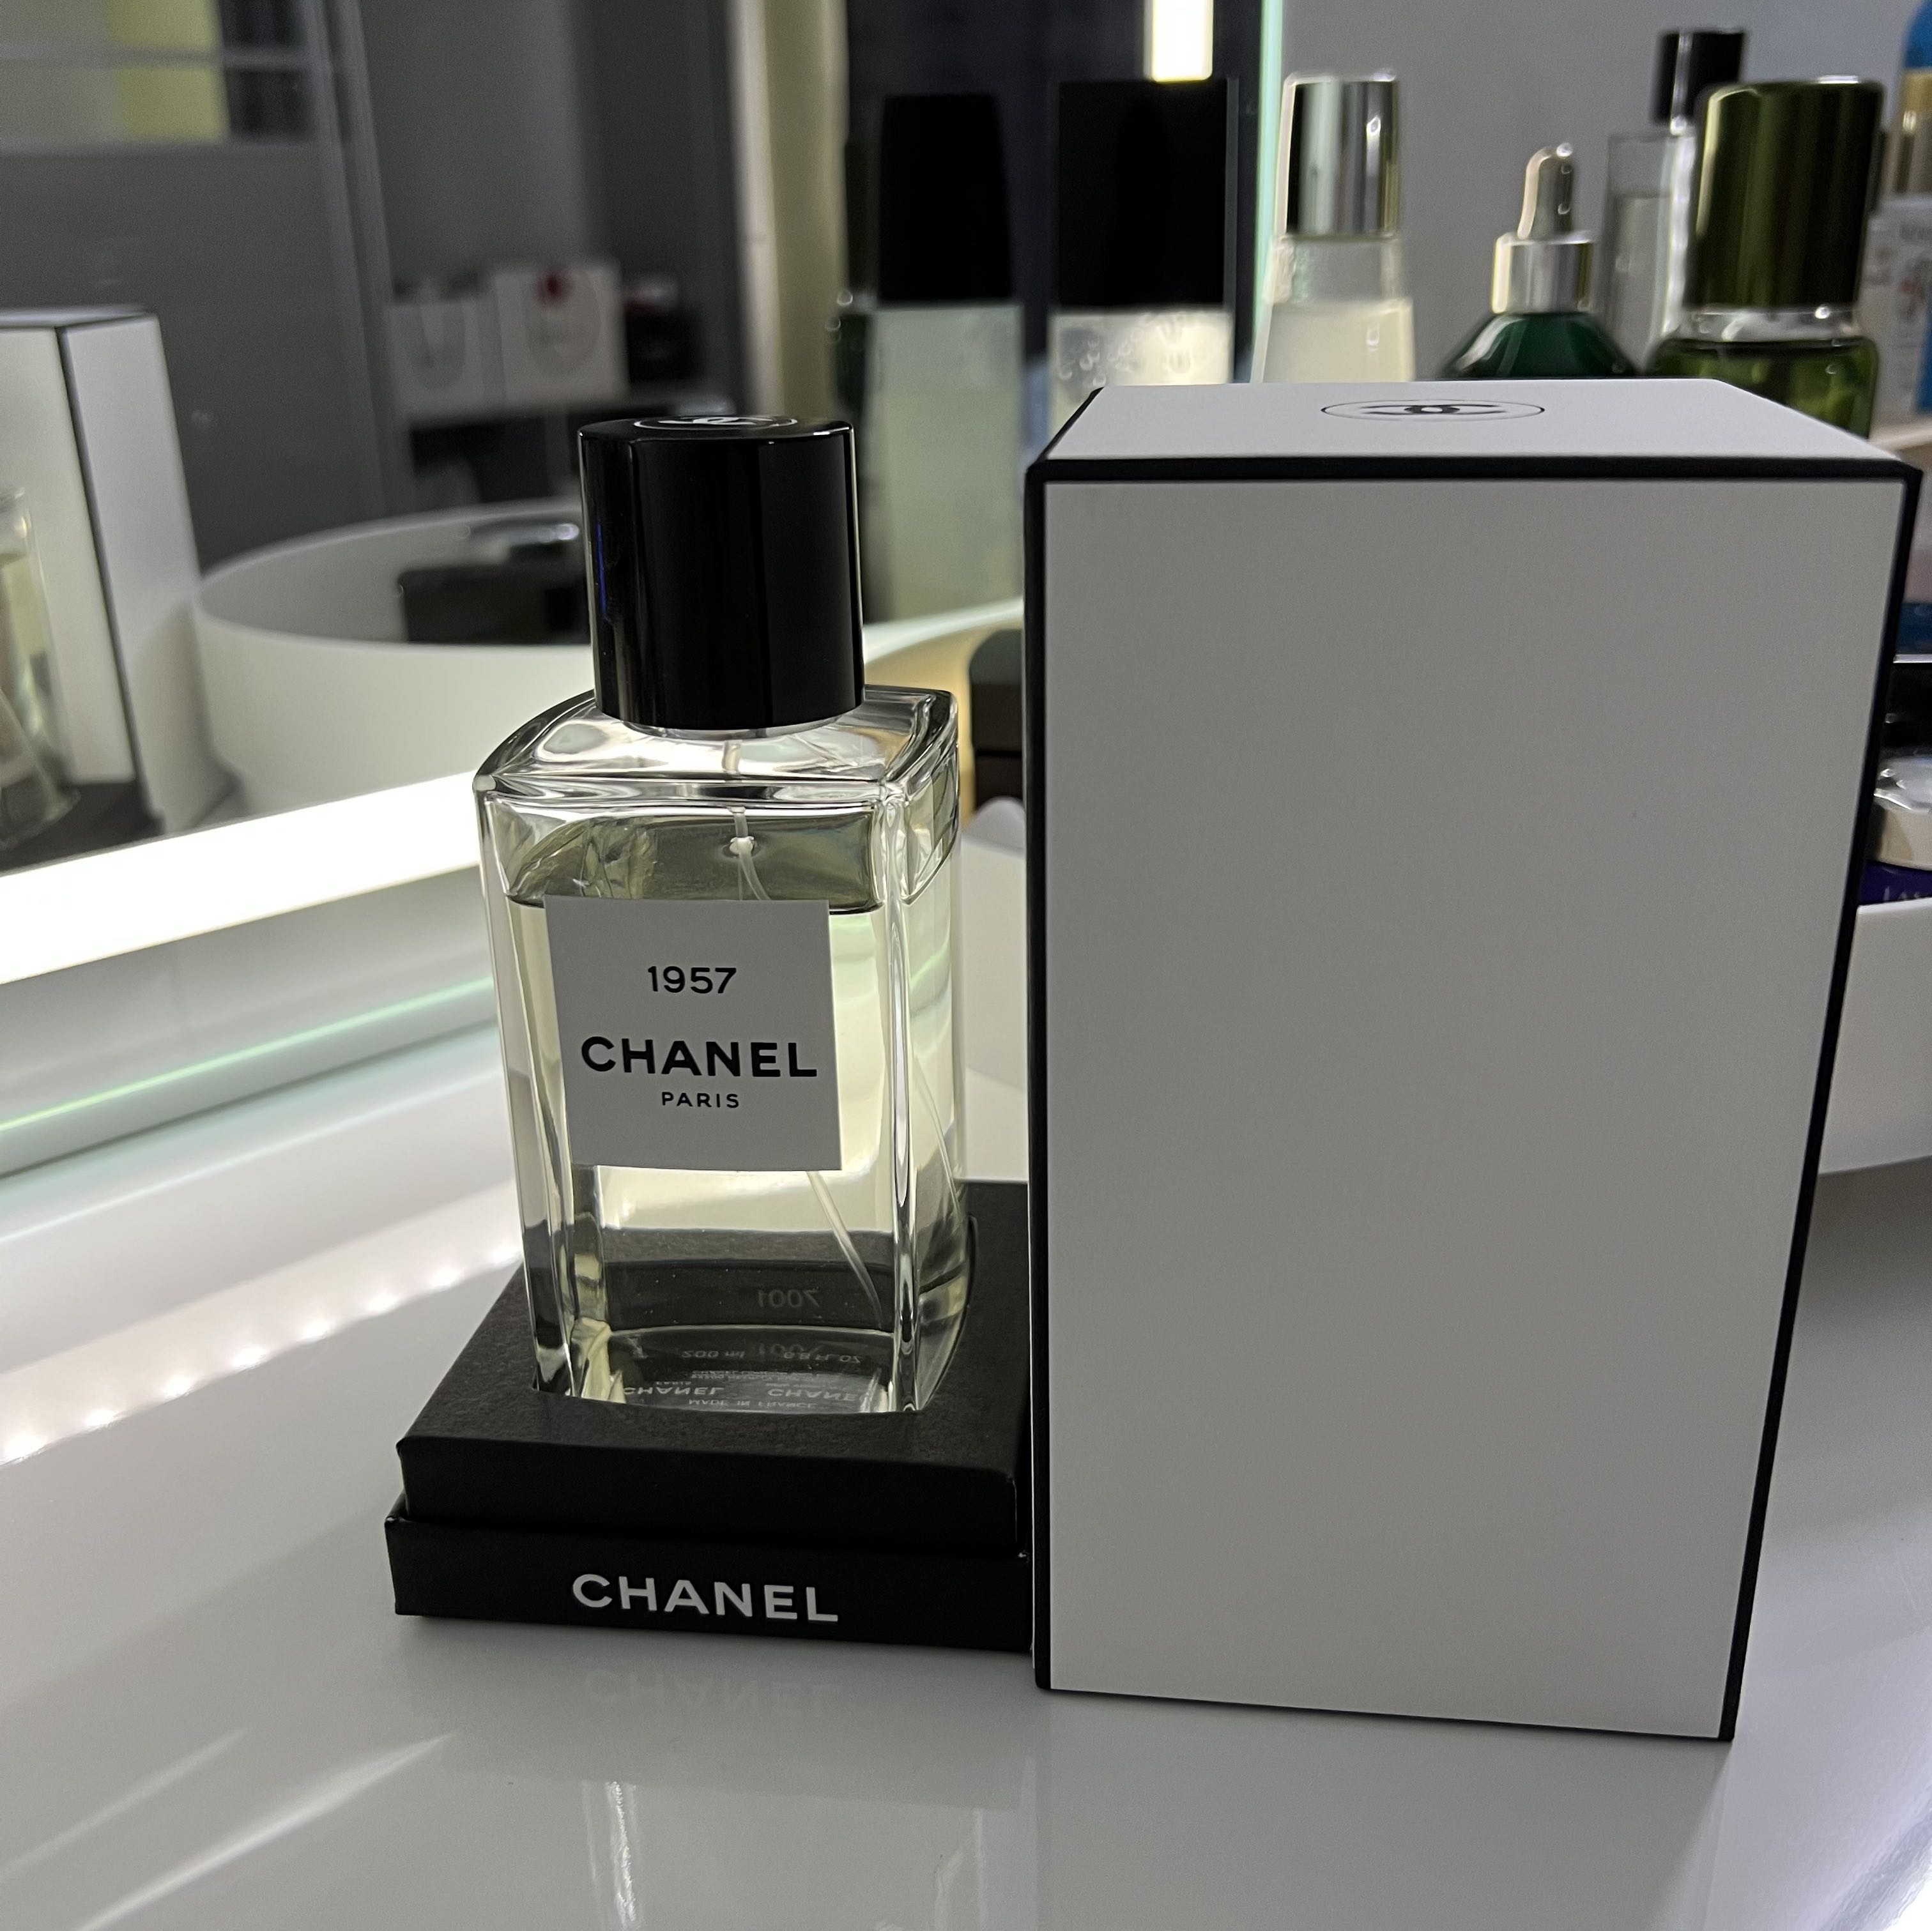 Buy Chanel 1957 EDP 4ml Les Exclusifs Miniature Perfume Online at